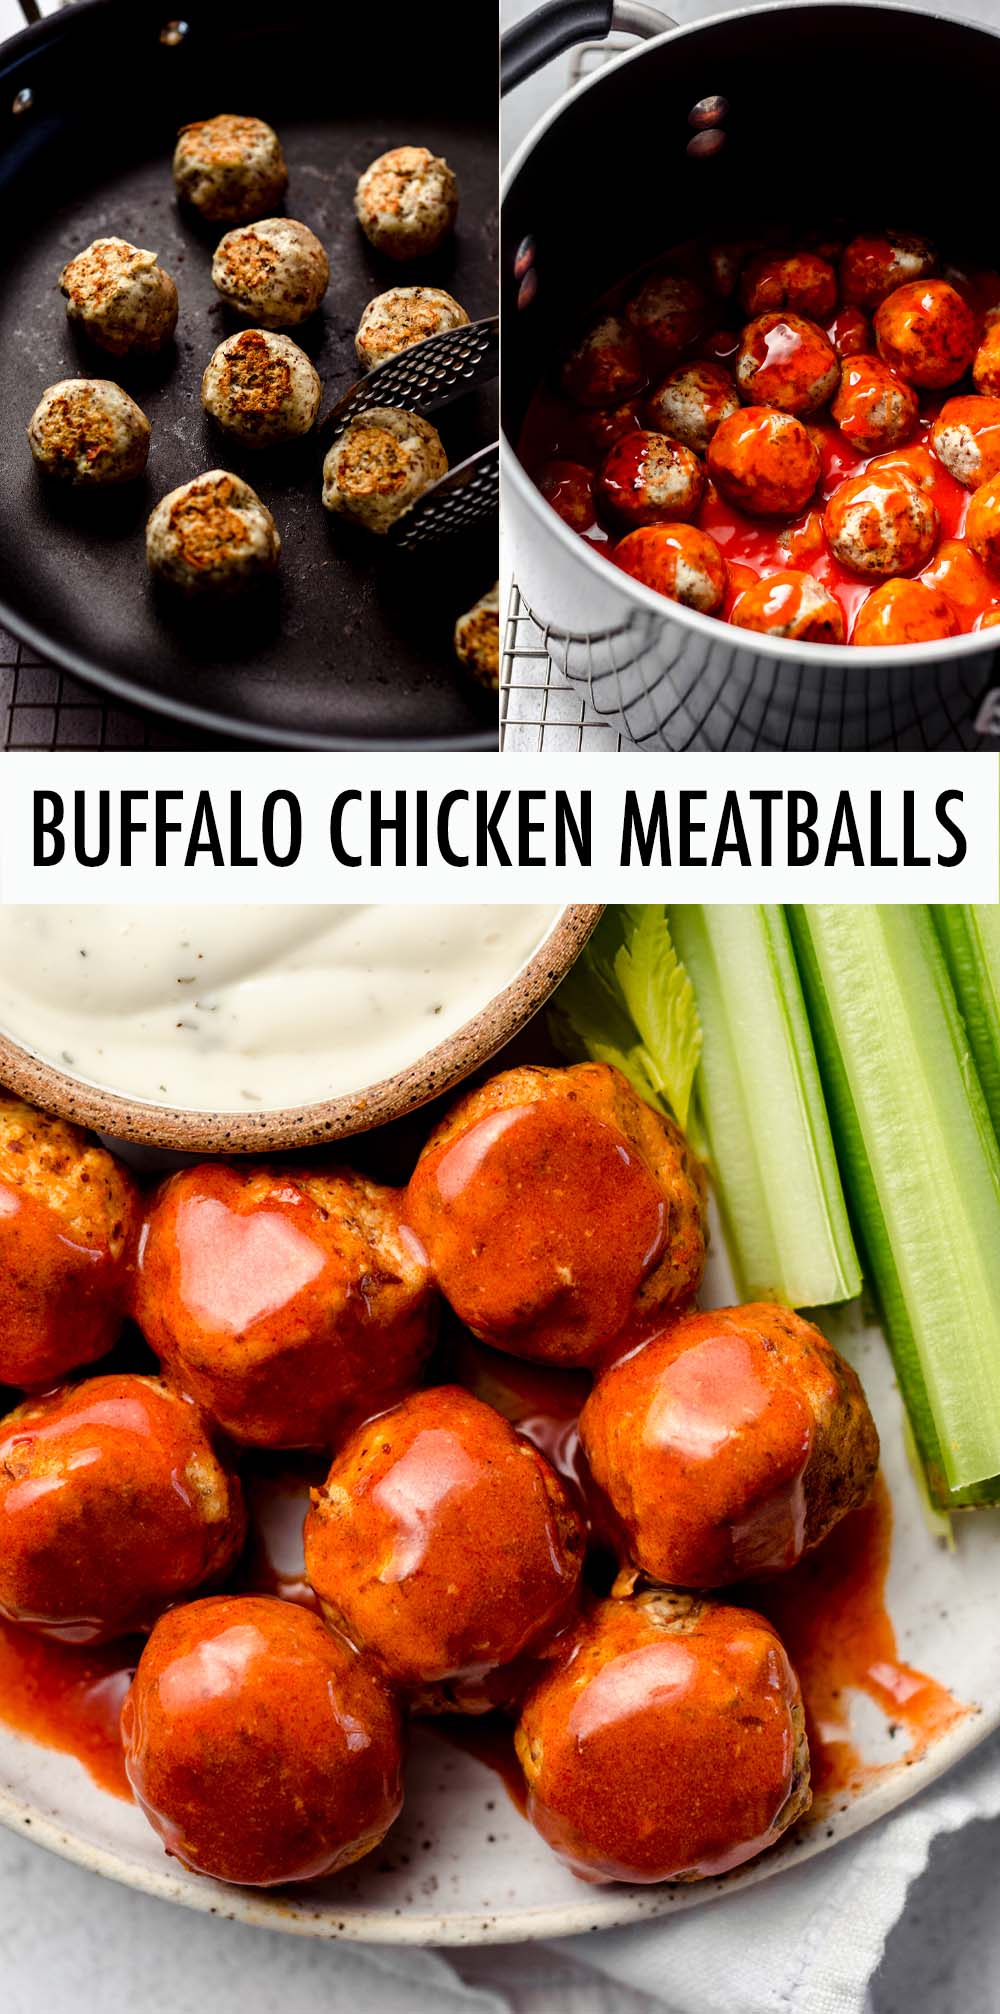 These simple ground chicken meatballs are cooked in a spicy buffalo sauce, making them great as an appetizer or a meal. As written, the recipe is completely gluten-free. Replace ground flaxseed with traditional breadcrumbs if you prefer. via @frshaprilflours